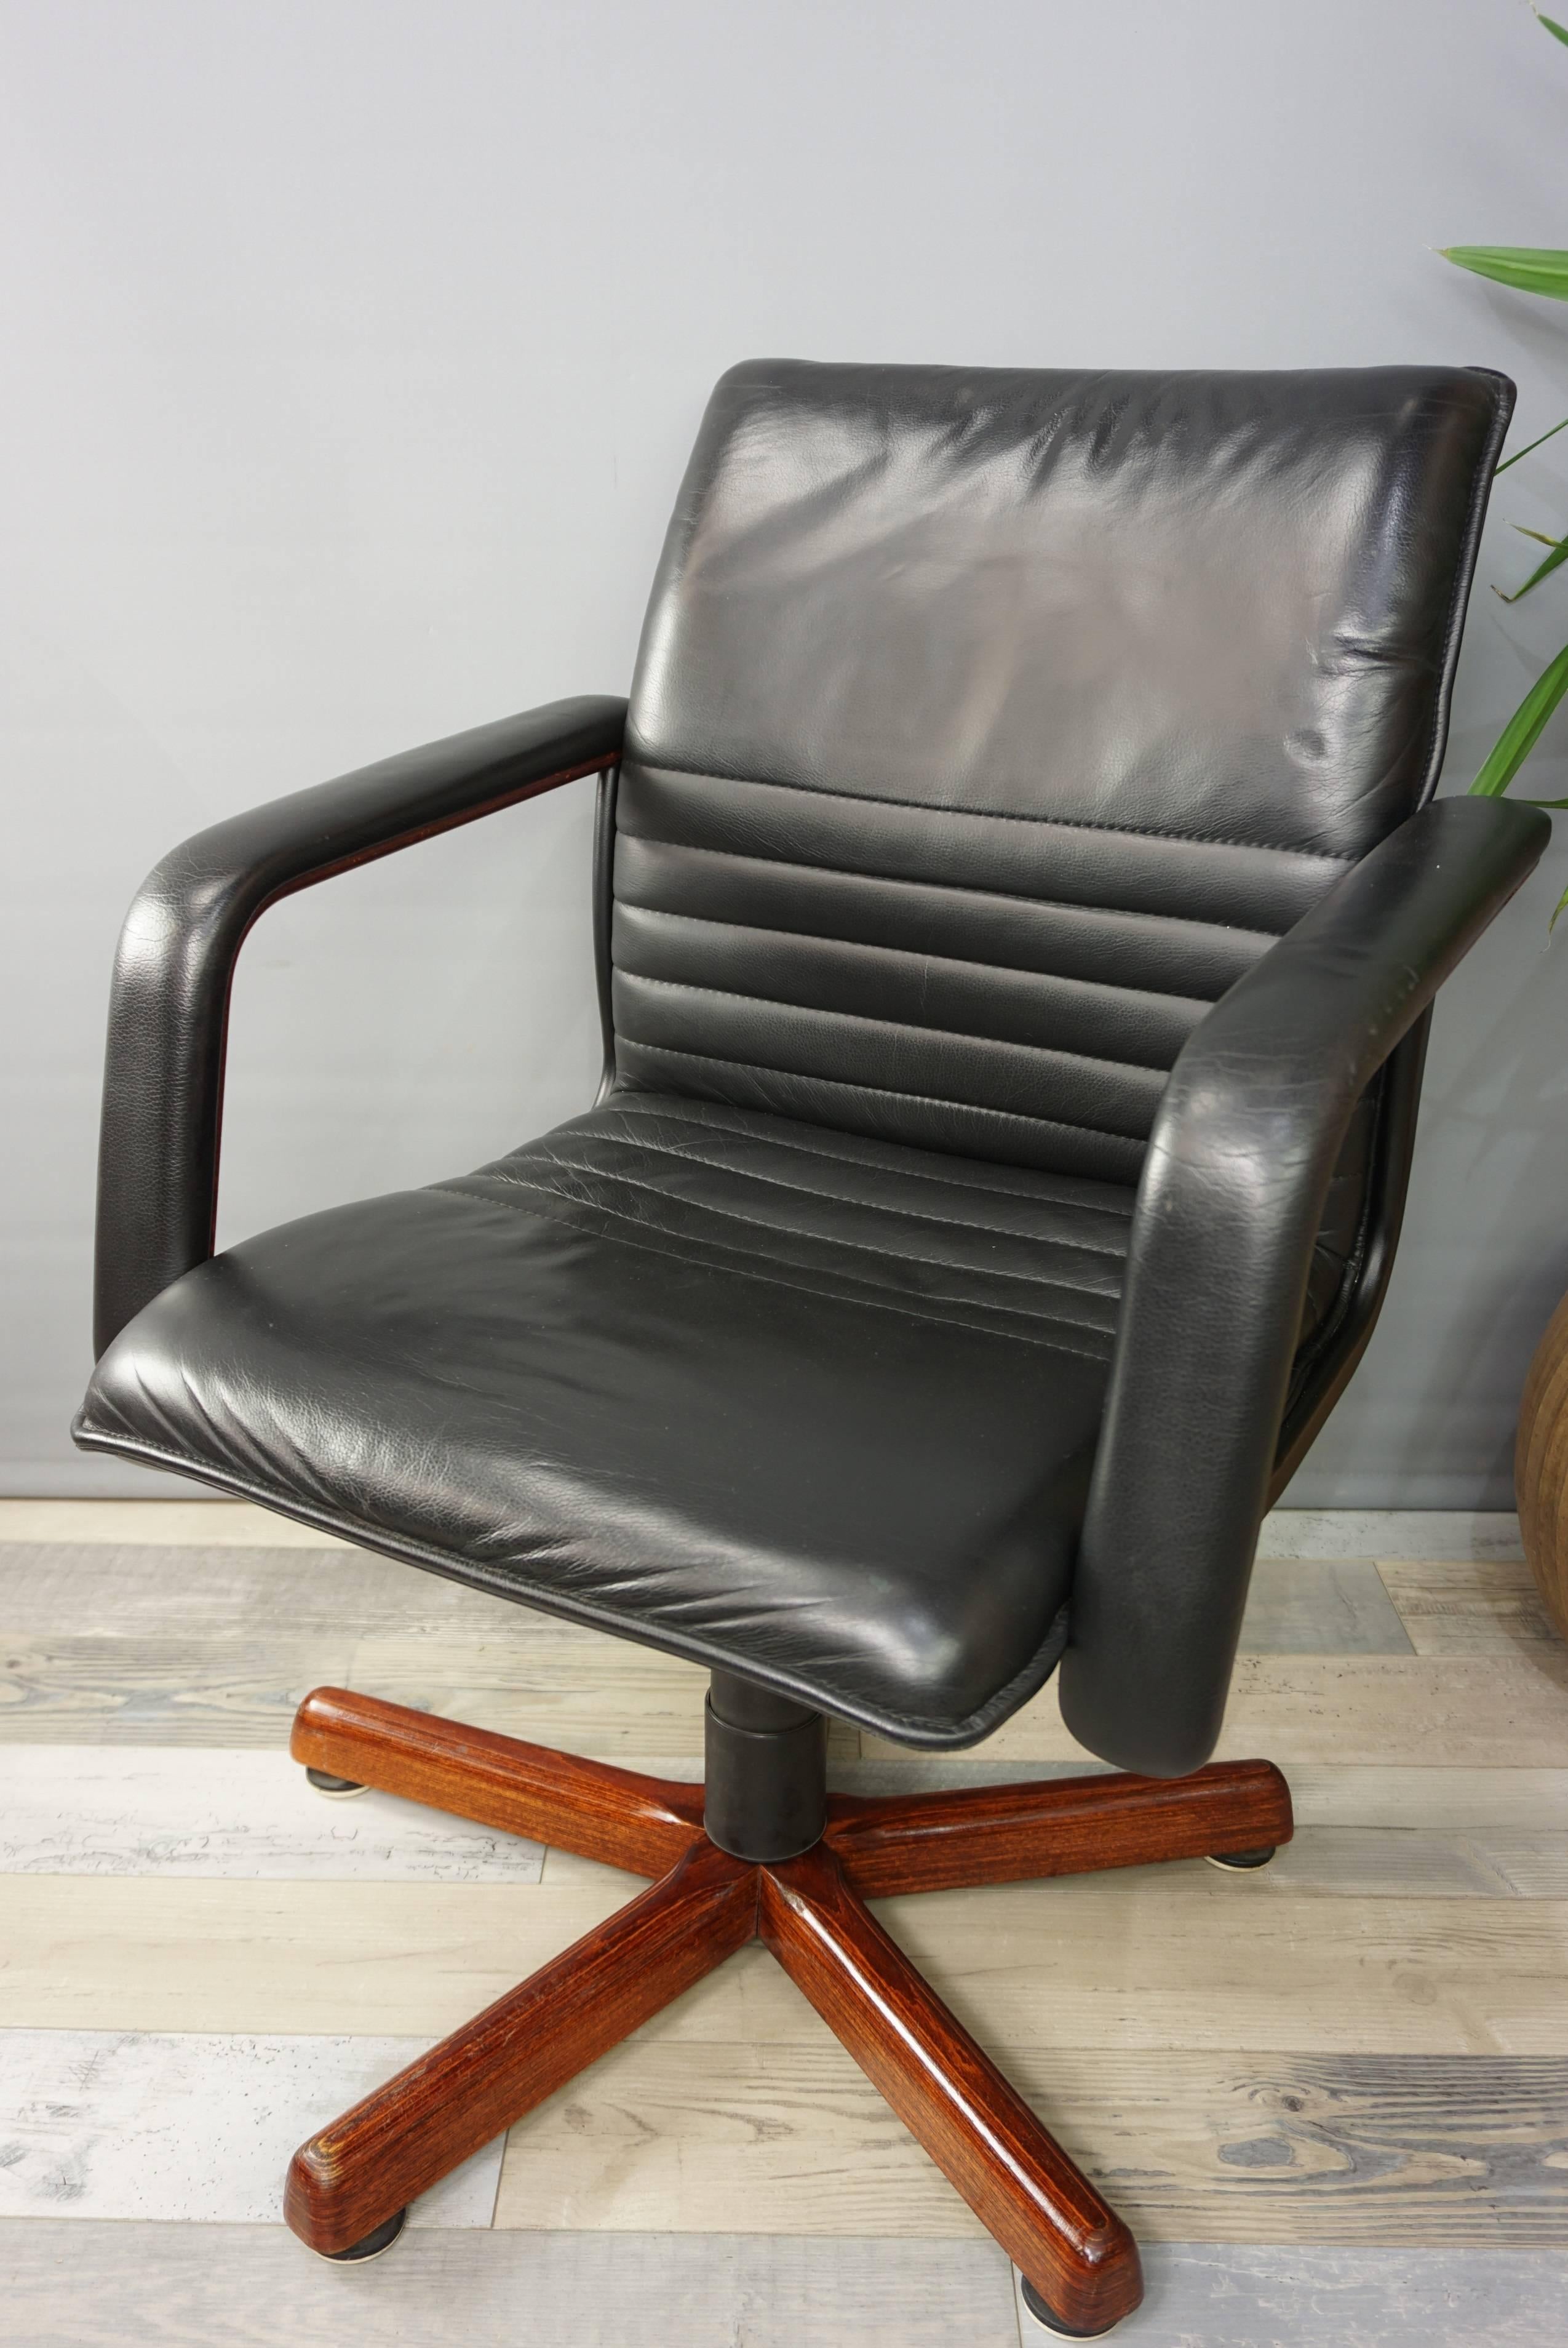 Noble materials, class and presence for this swivel office chair (fixed height) black leather shell, wooden armrests upholstered and dressed in leather. Its star-shaped base allows the chair to return to its original position and is made of matching